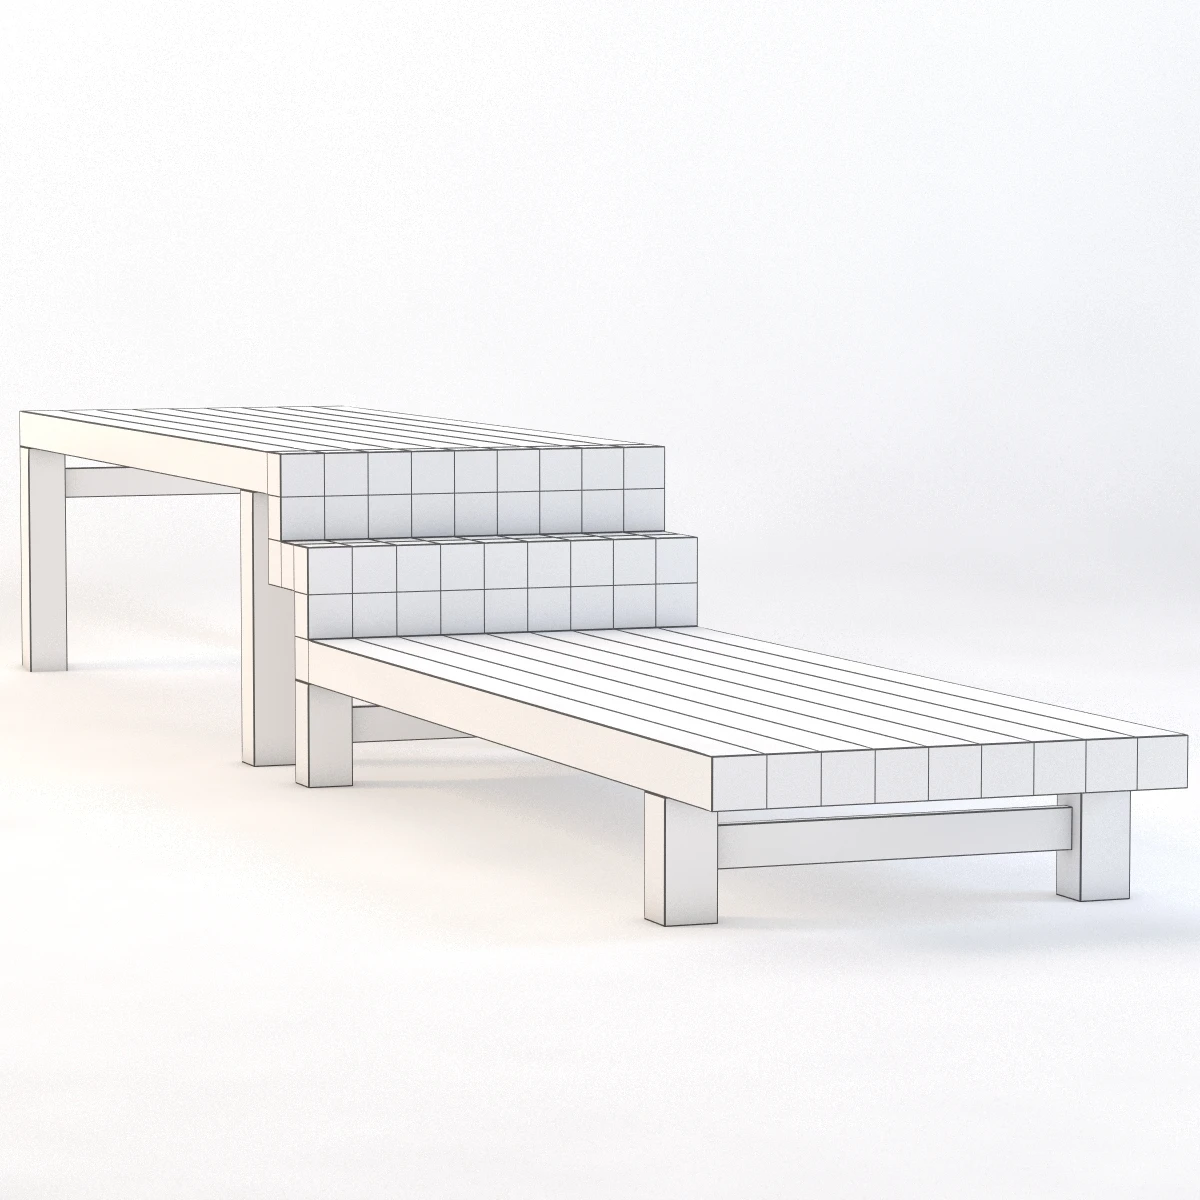 Stage Step Table 3D Model_09